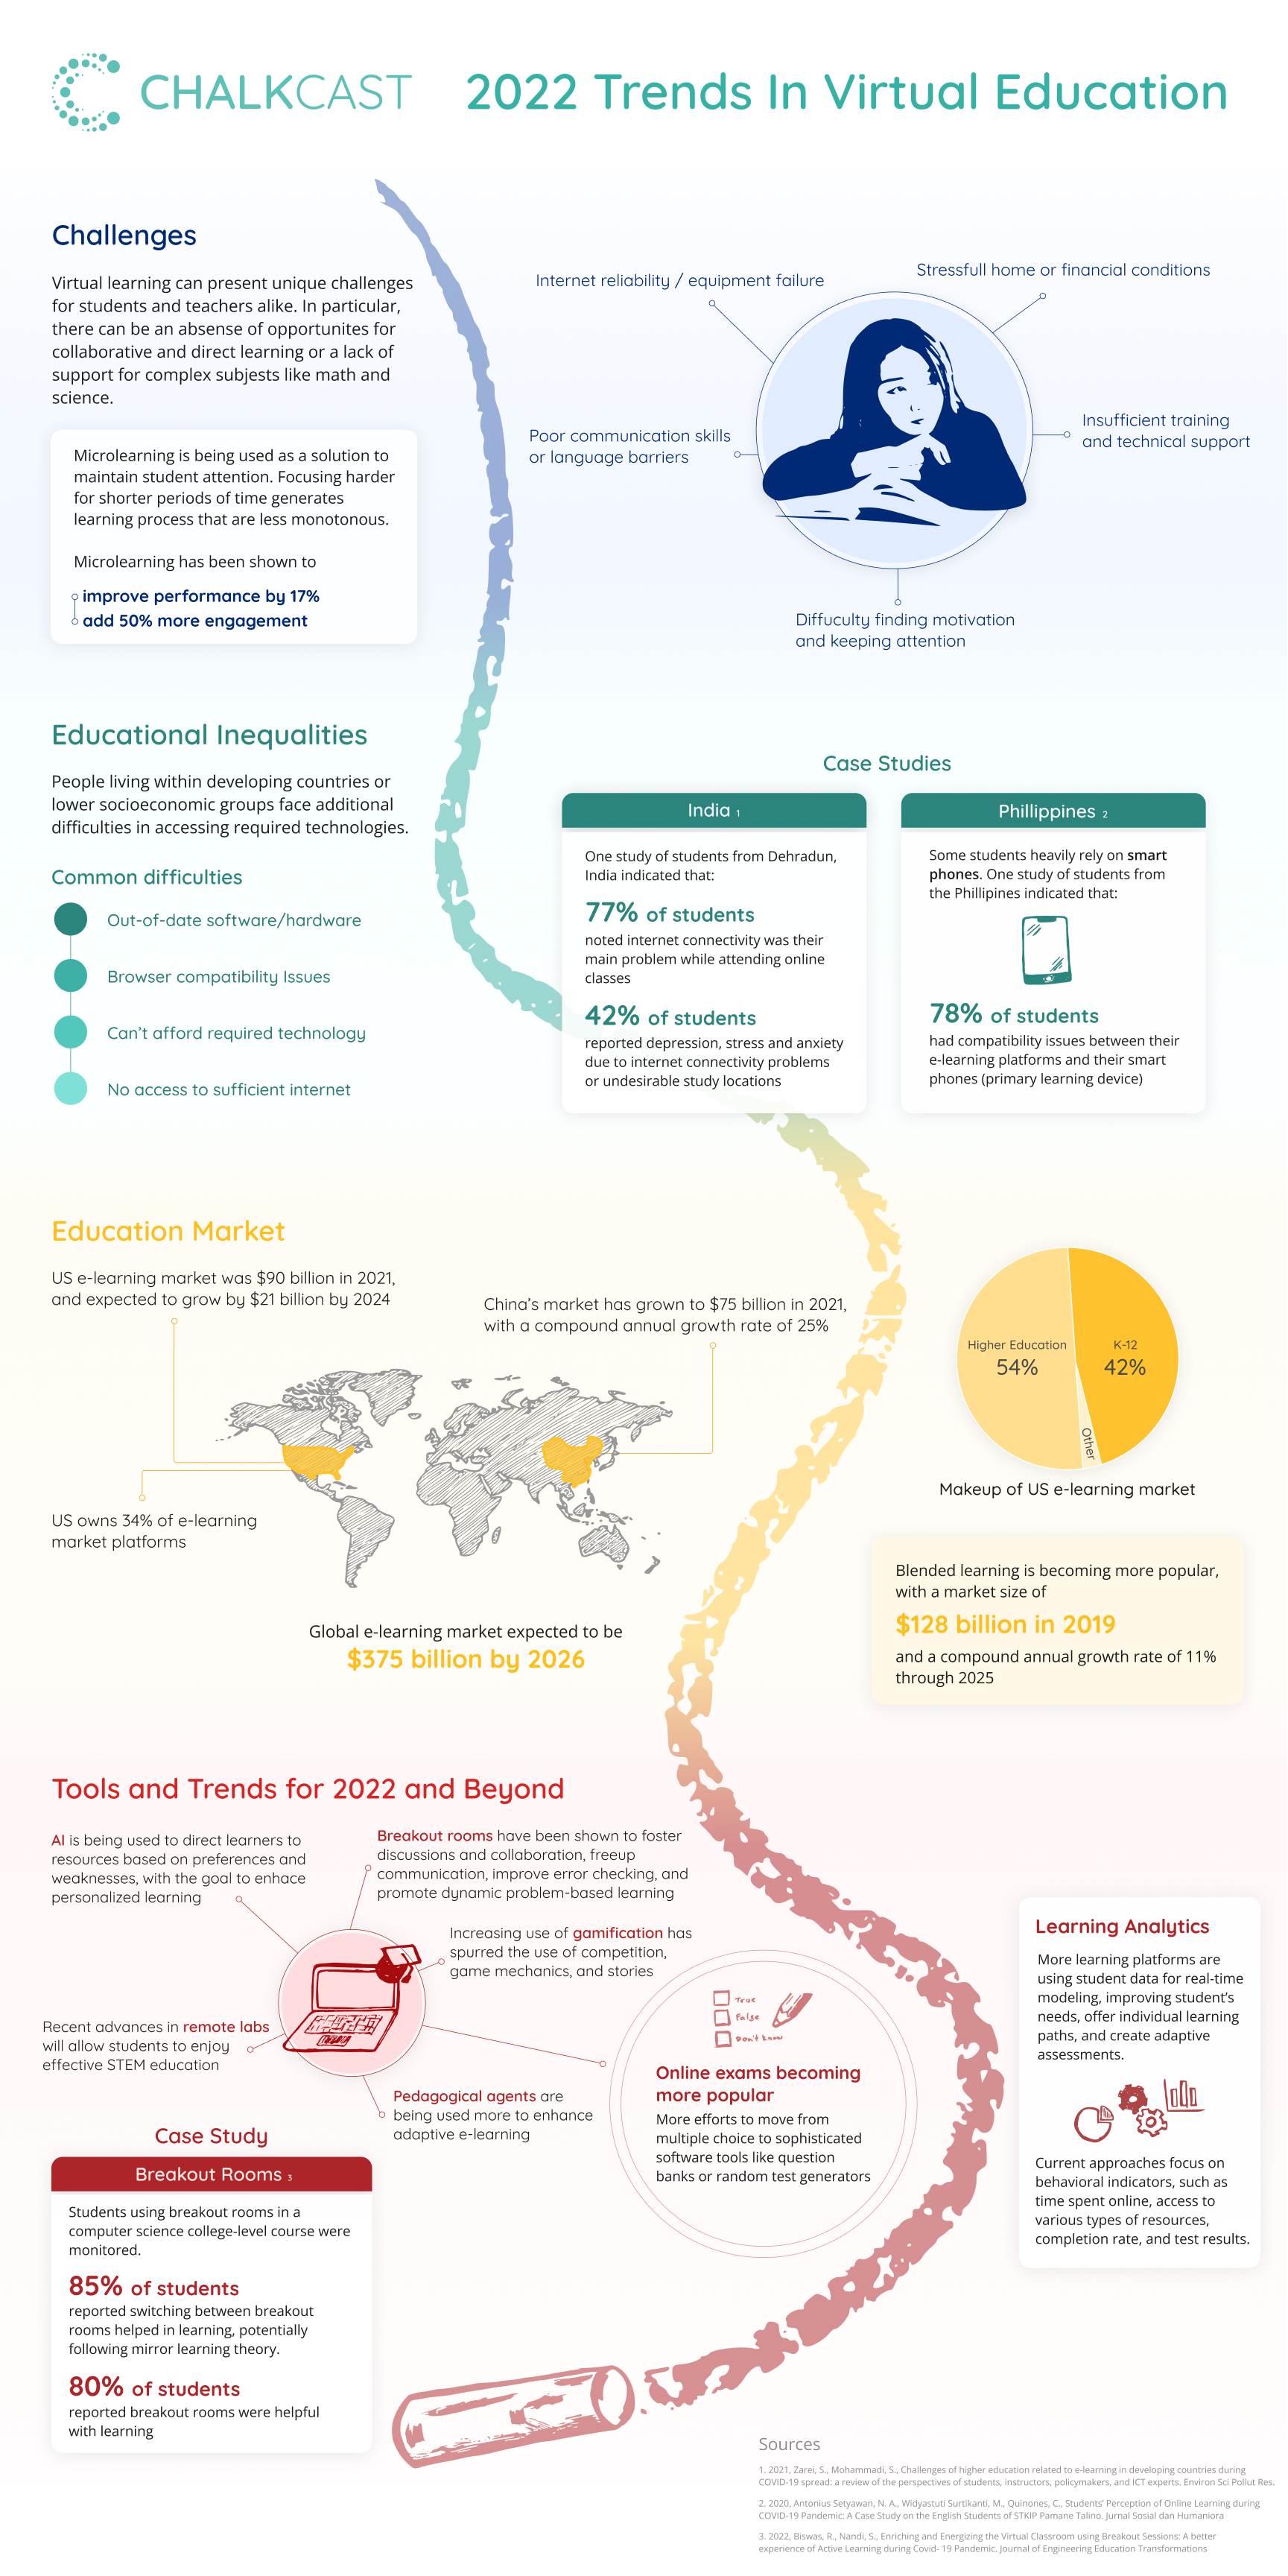 Infographic showing 2022 Virtual Education Trends